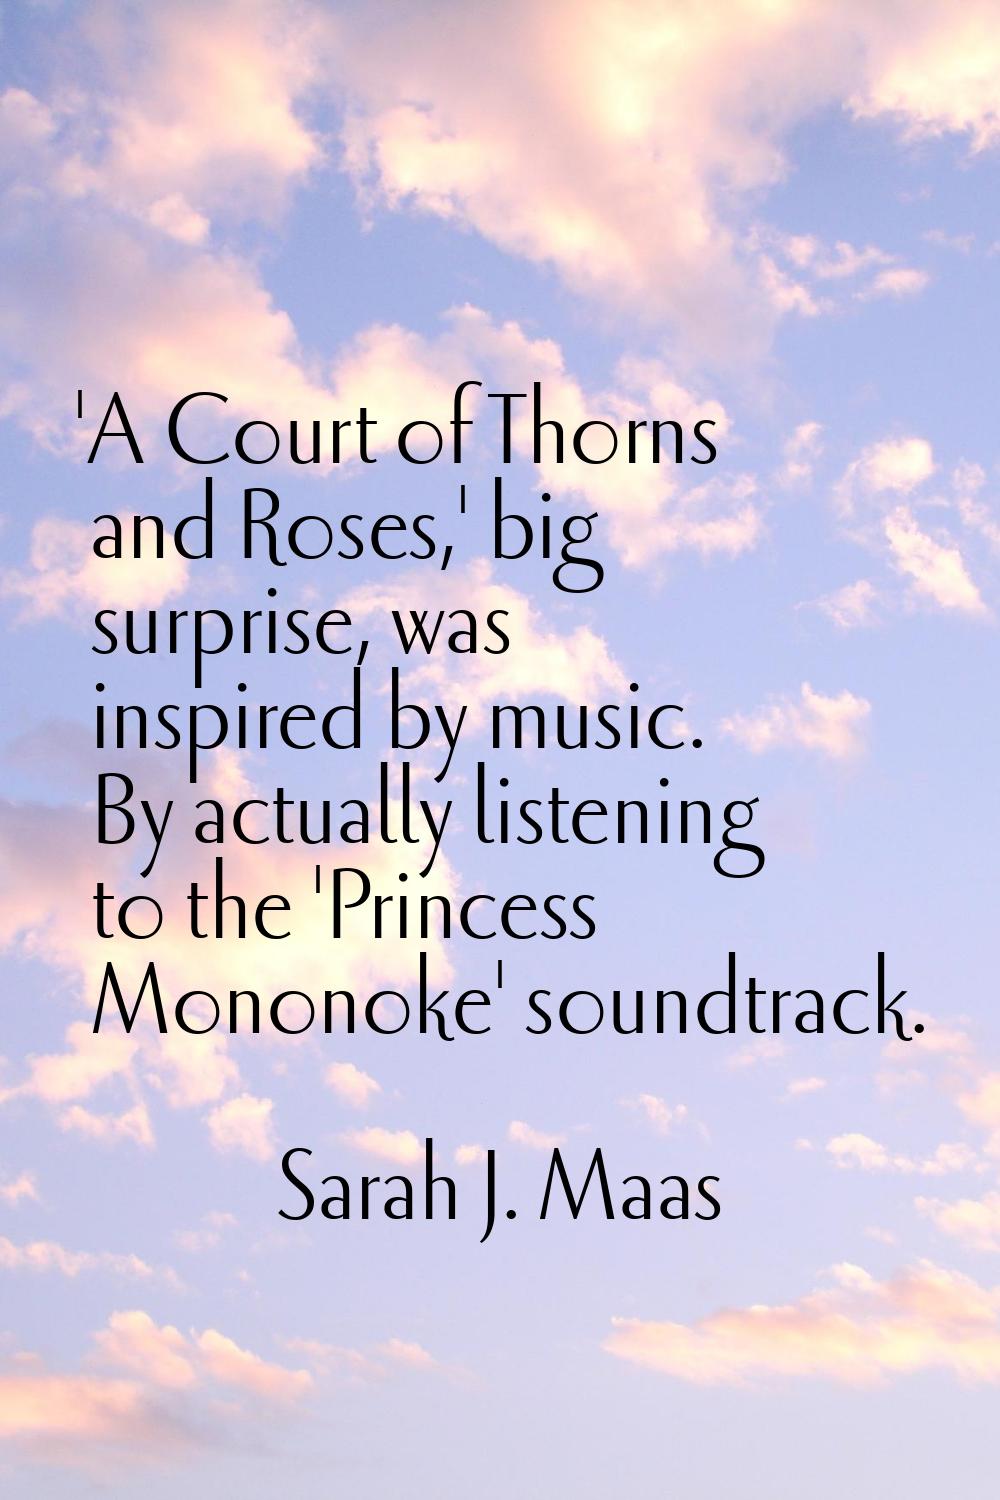 'A Court of Thorns and Roses,' big surprise, was inspired by music. By actually listening to the 'P